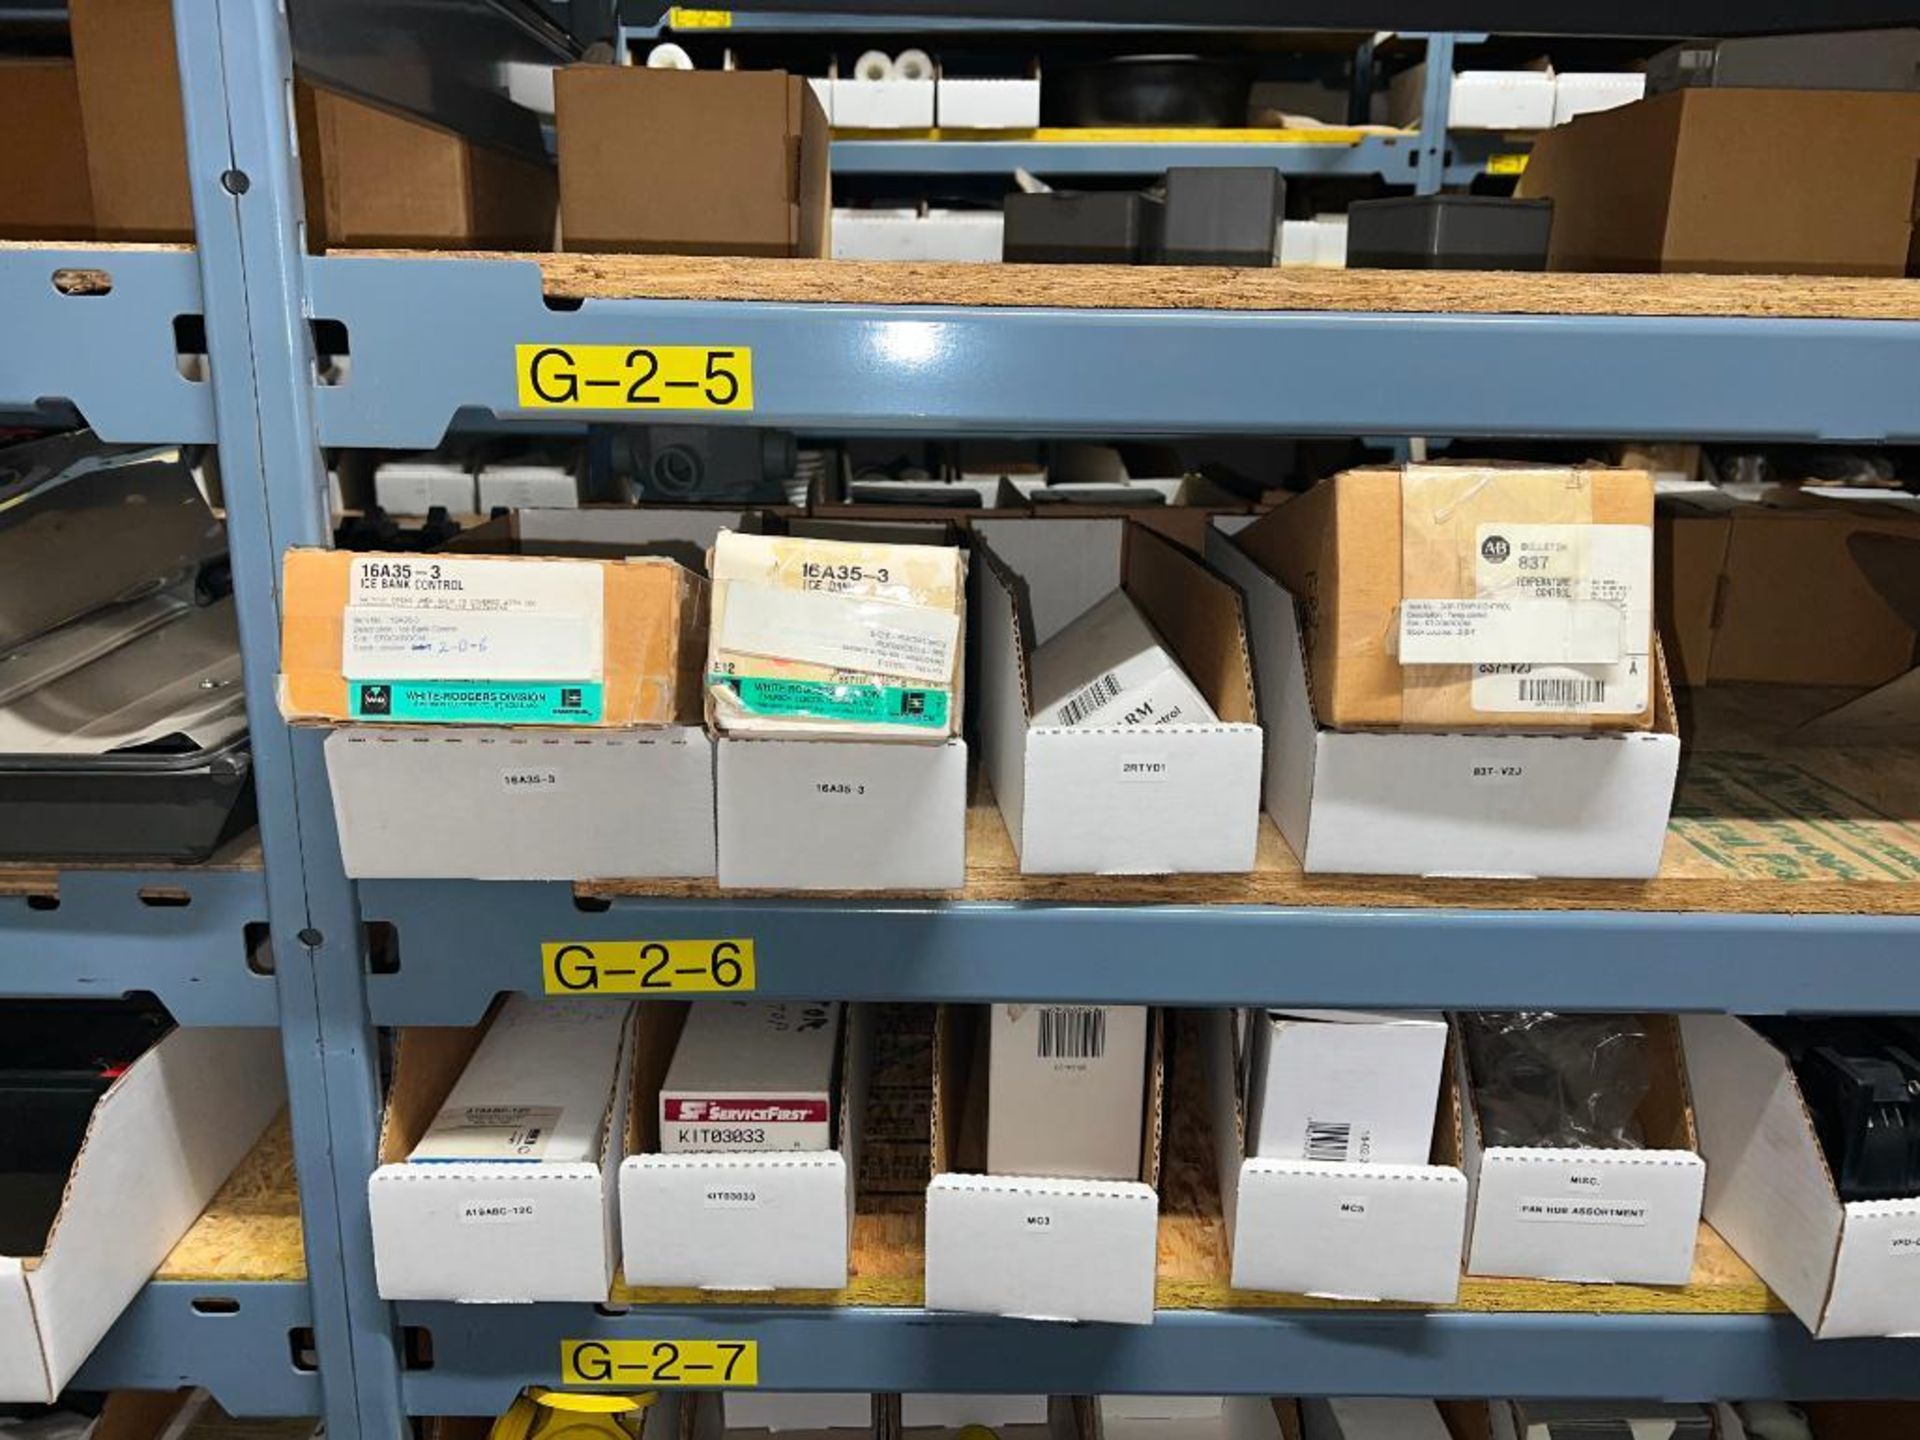 Assorted Springs, Allen-Bradley Switches, Circuits, Assorted Electrical Parts and Hardware - Image 14 of 29